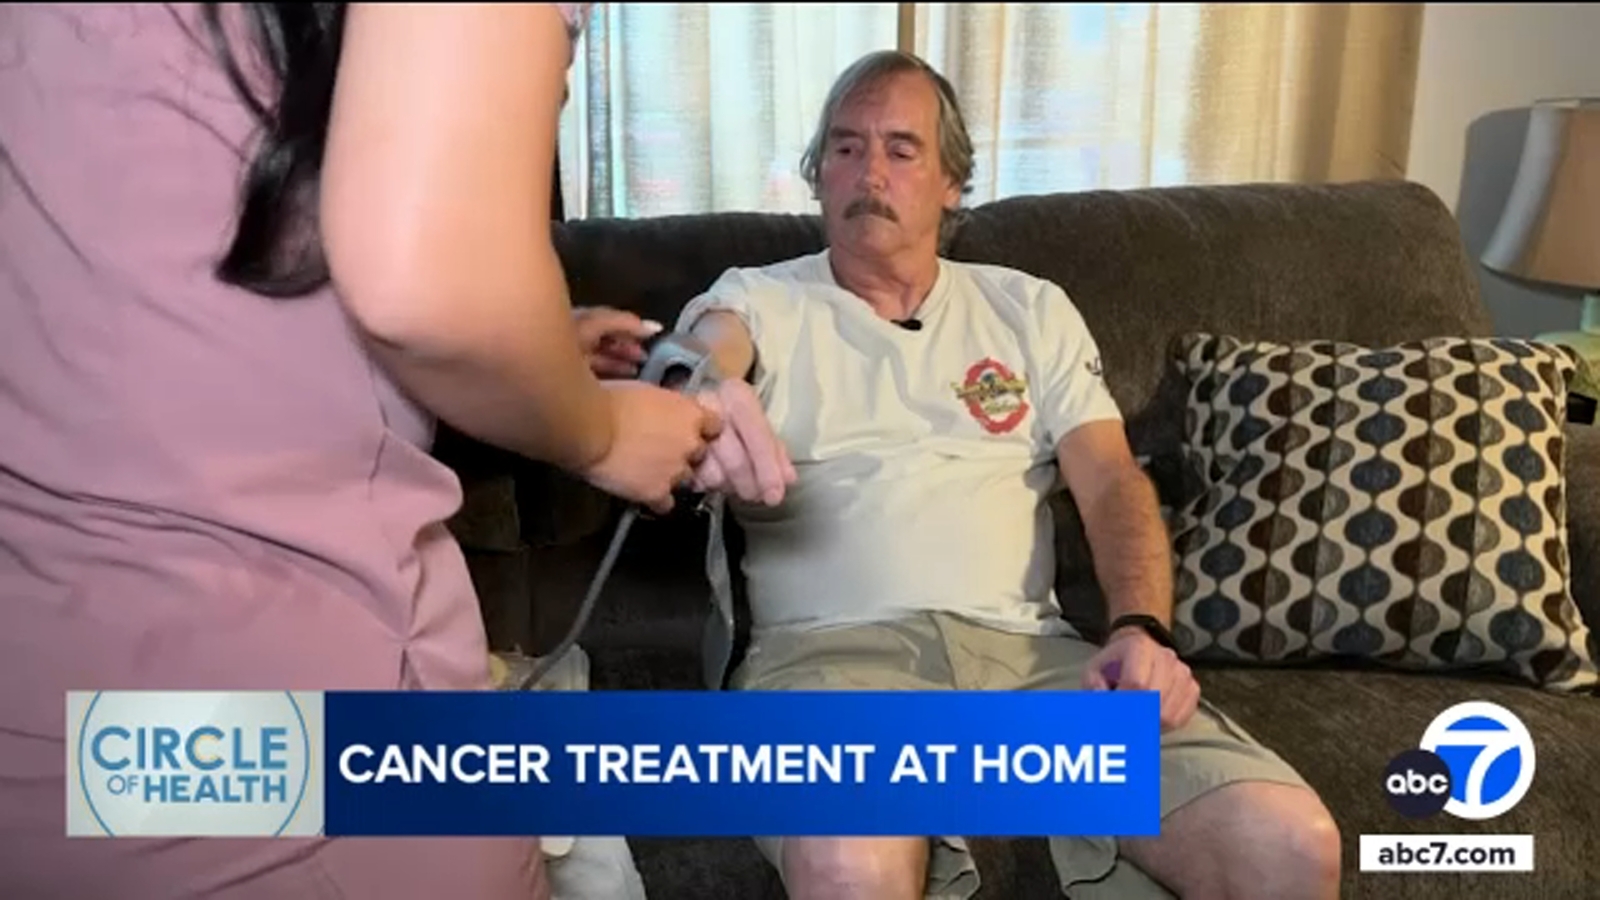 Lung cancer treatment at home? USC study explores at-home atezolizumab treatment for non-small cell lung cancer patients [Video]